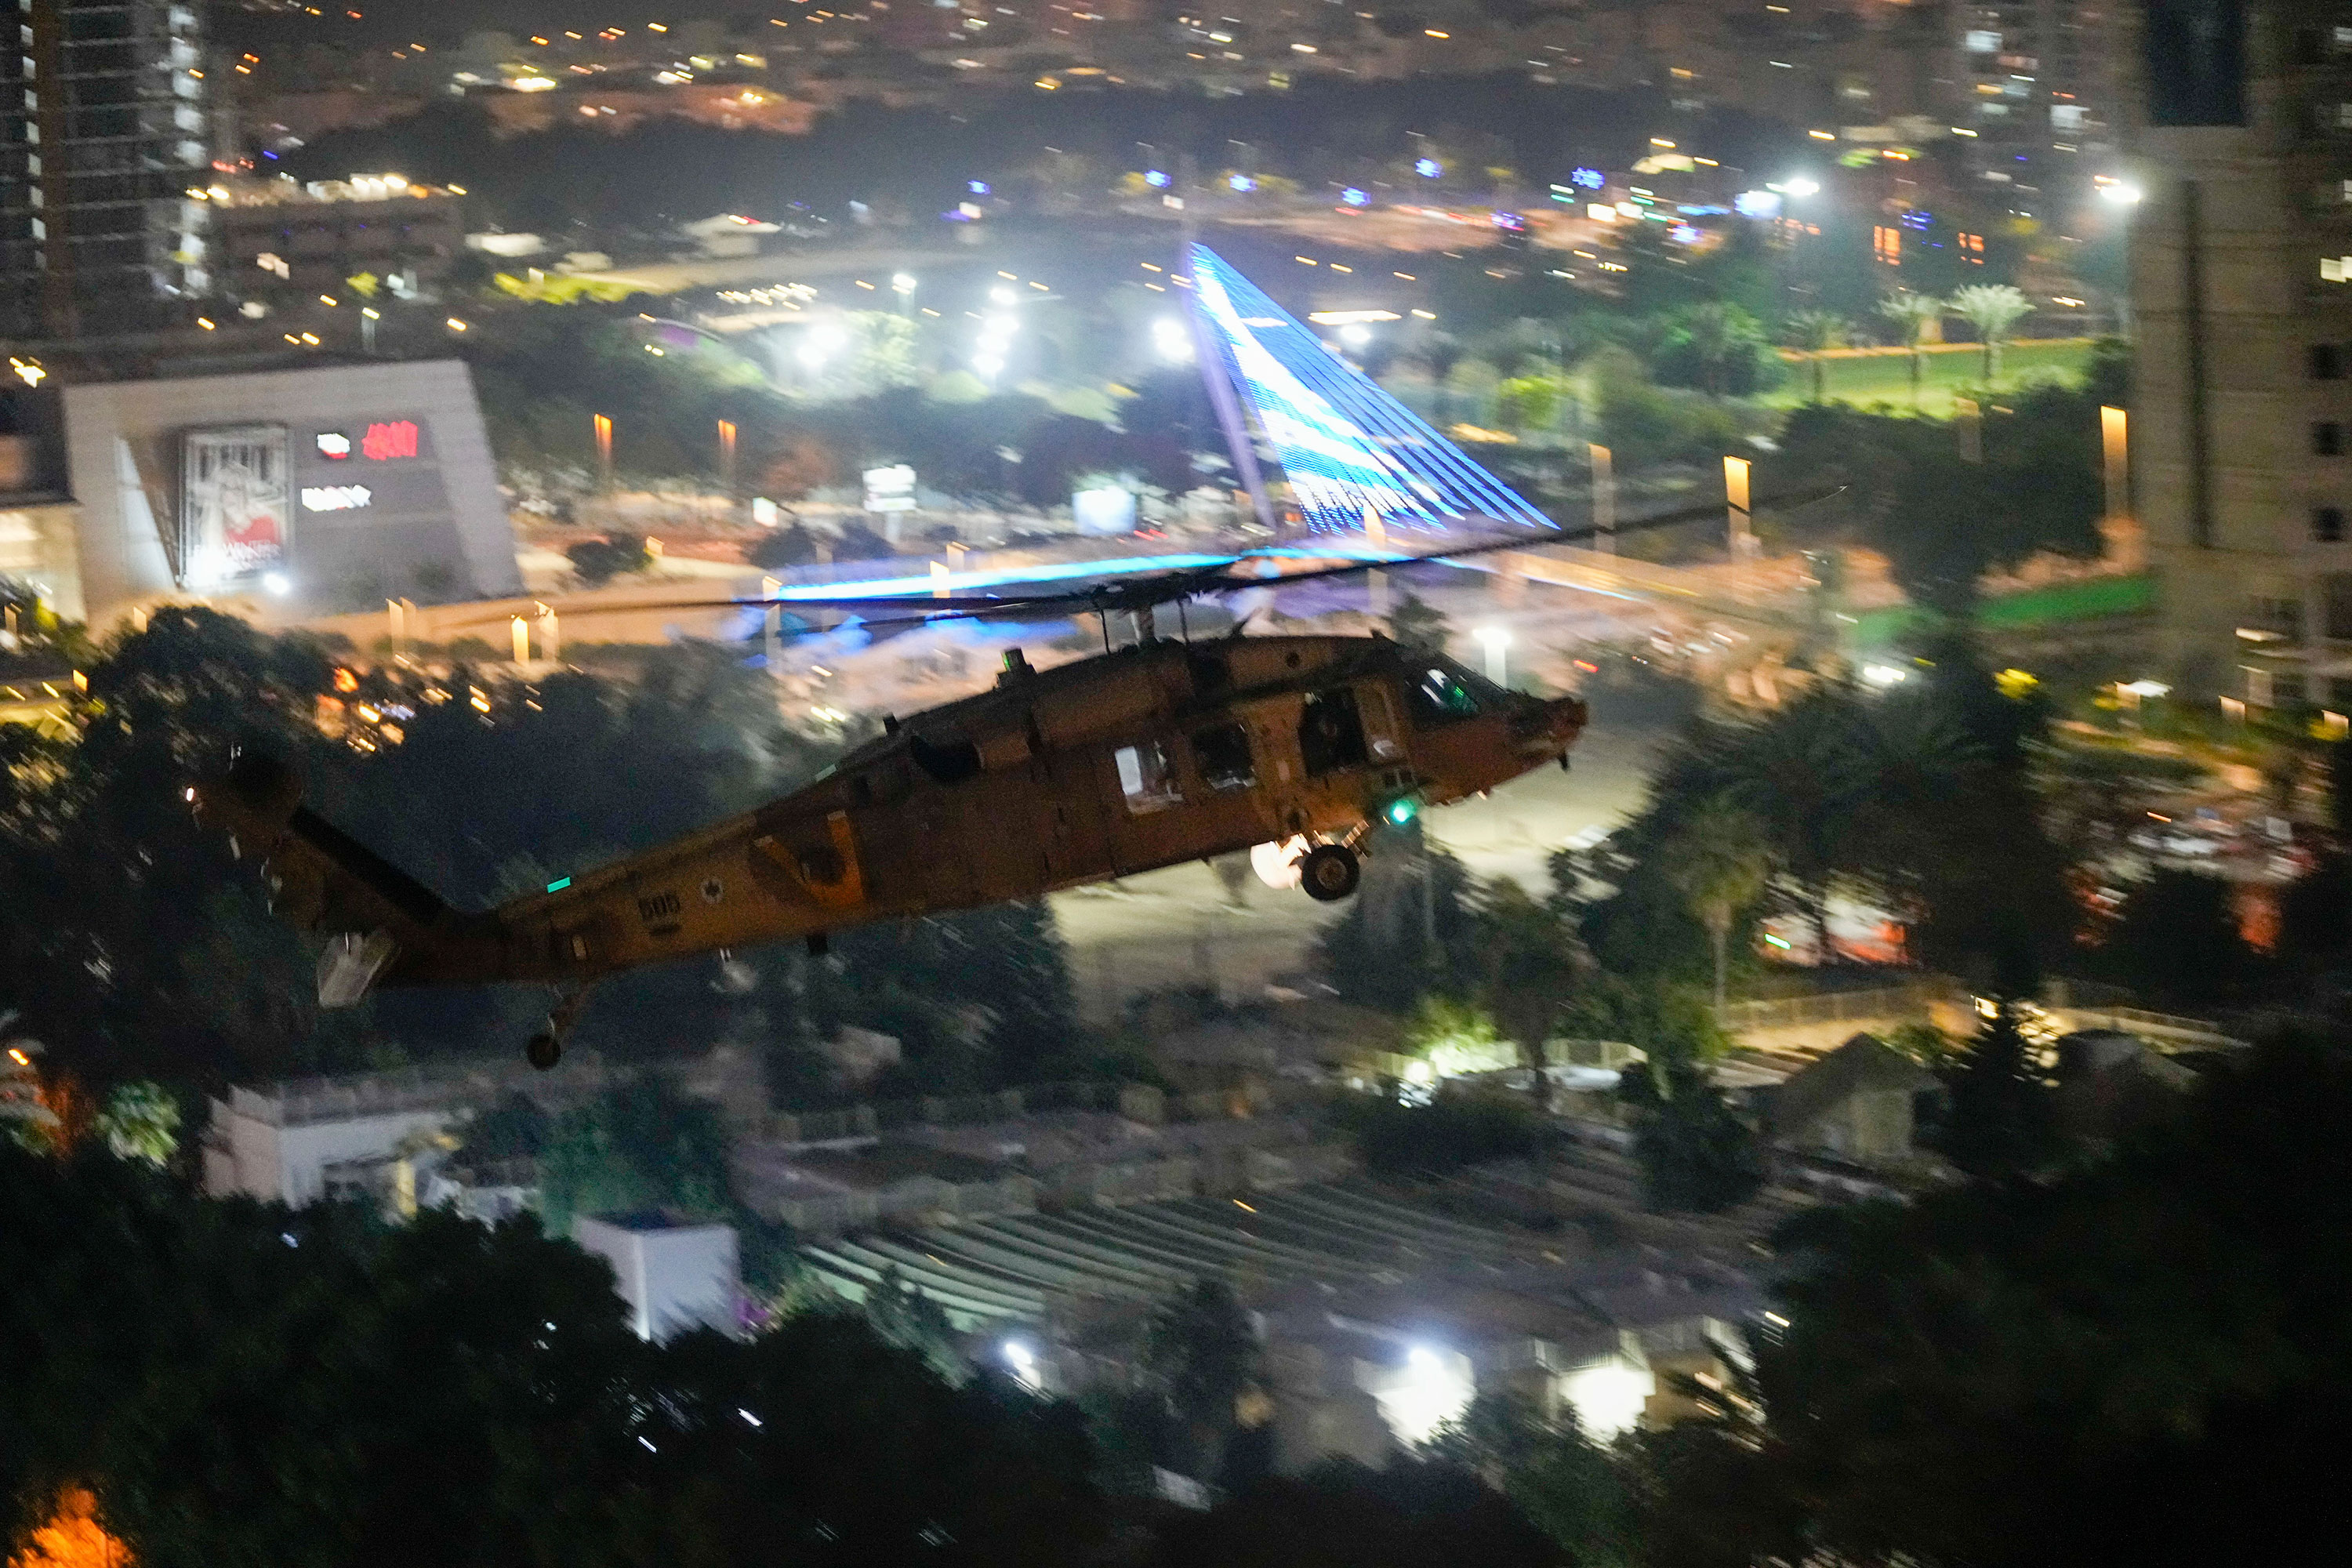 A helicopter carrying hostages released by Hamas lands at Schneider Children's Medical Center of Israel in Petah Tikva, Israel, on Friday. 